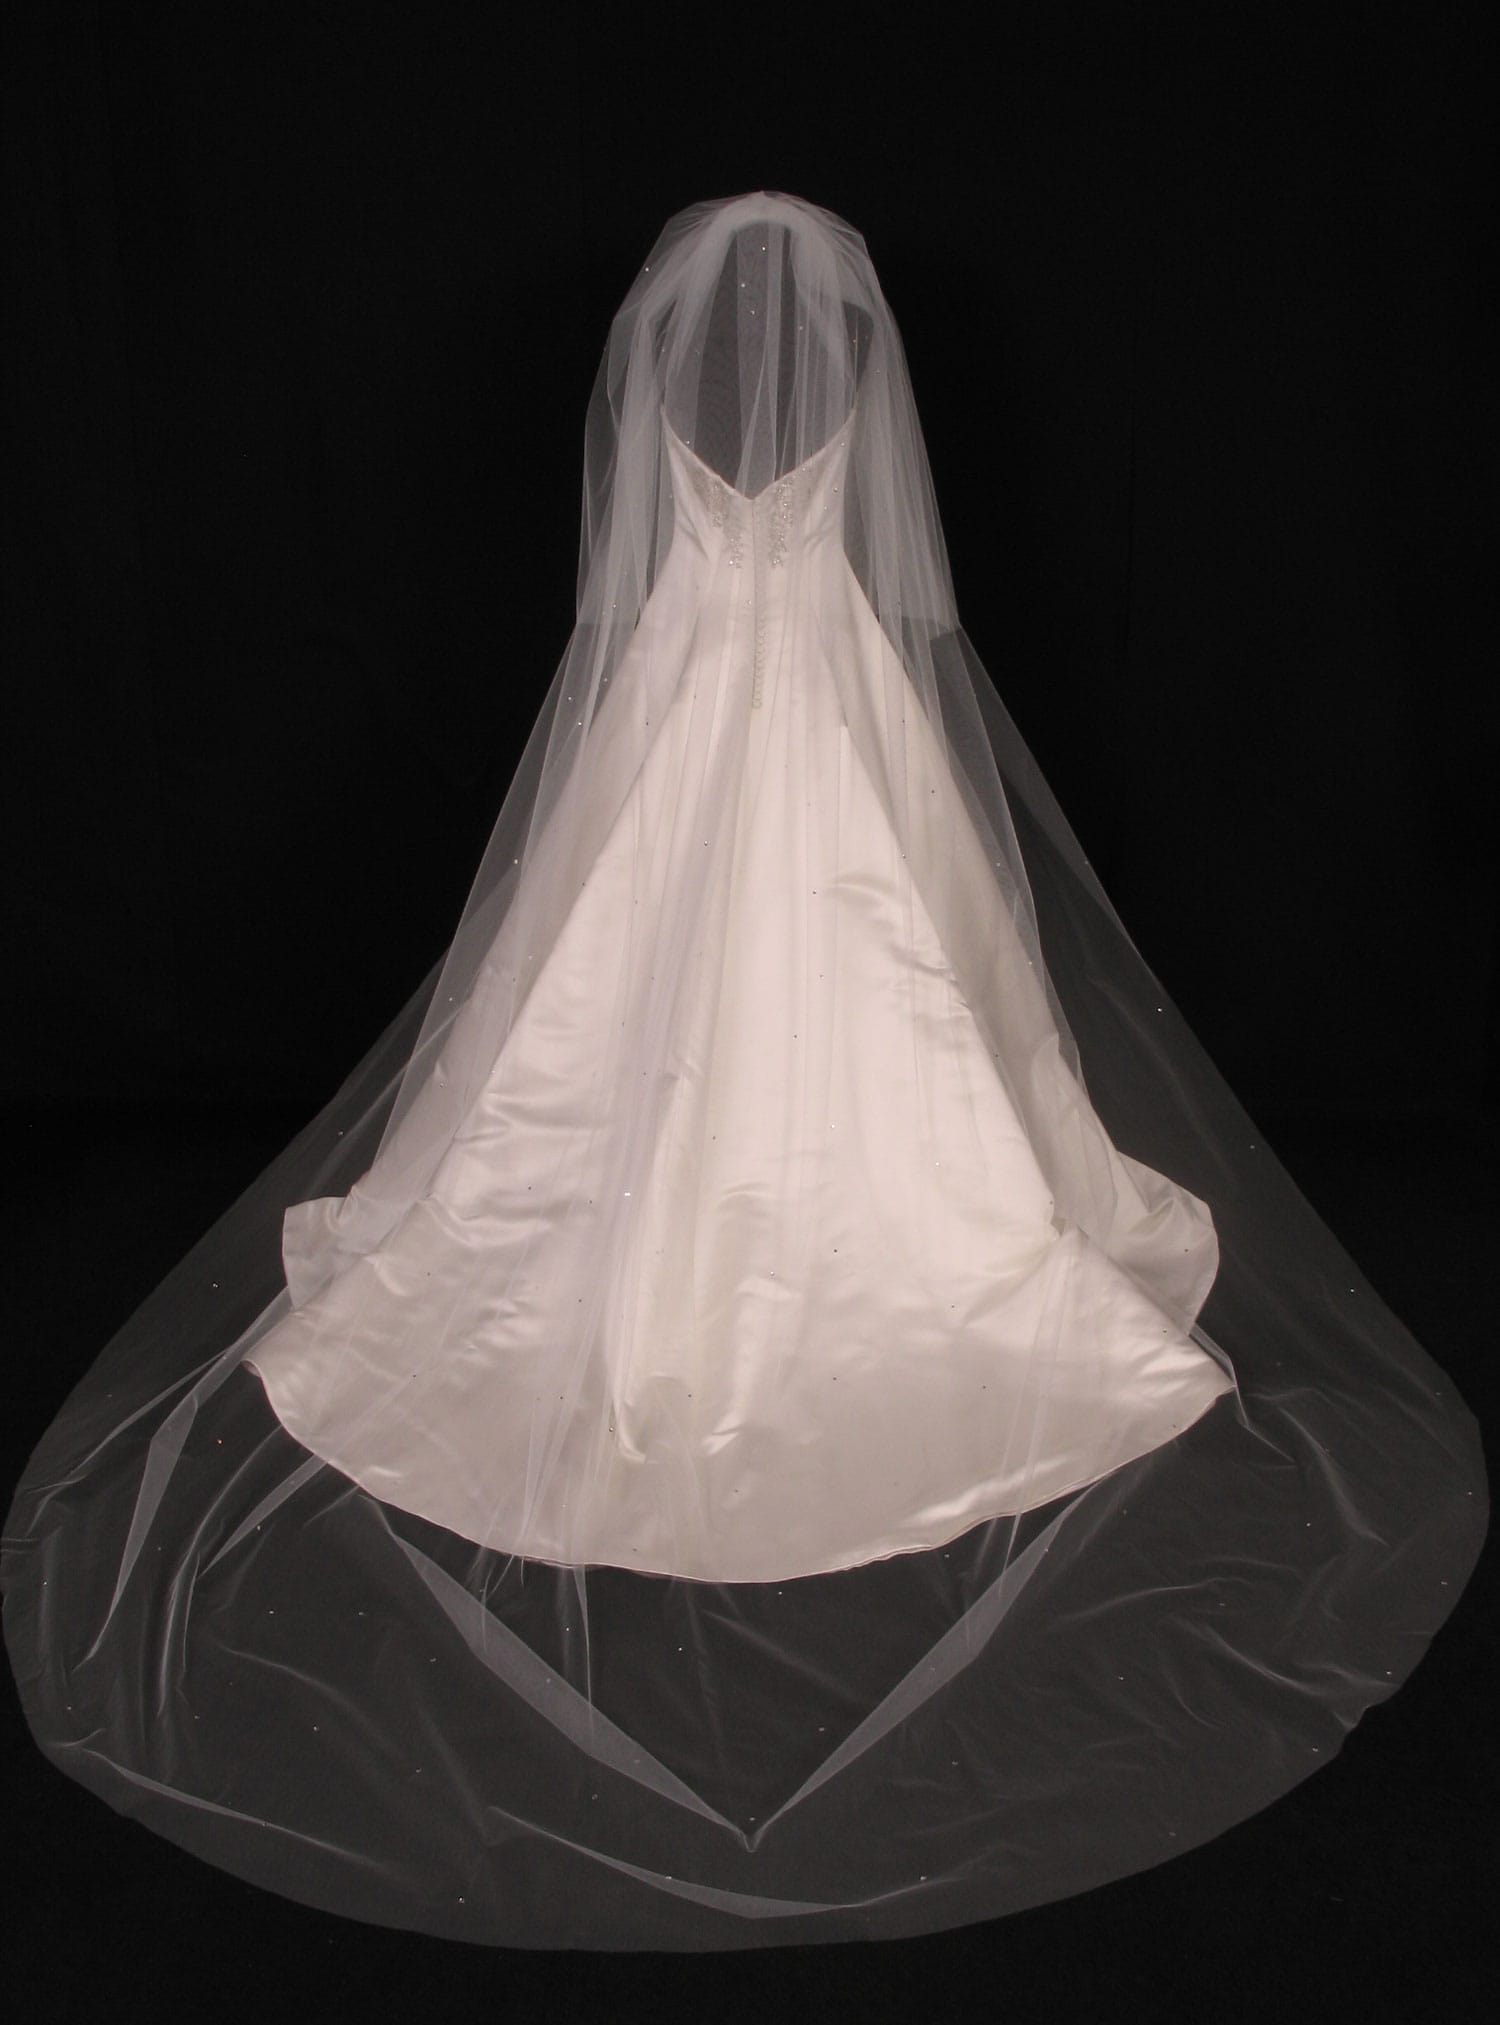 Your Dream Dress Exclusive S414VL Diamond White Cathedral Length Bridal Veil